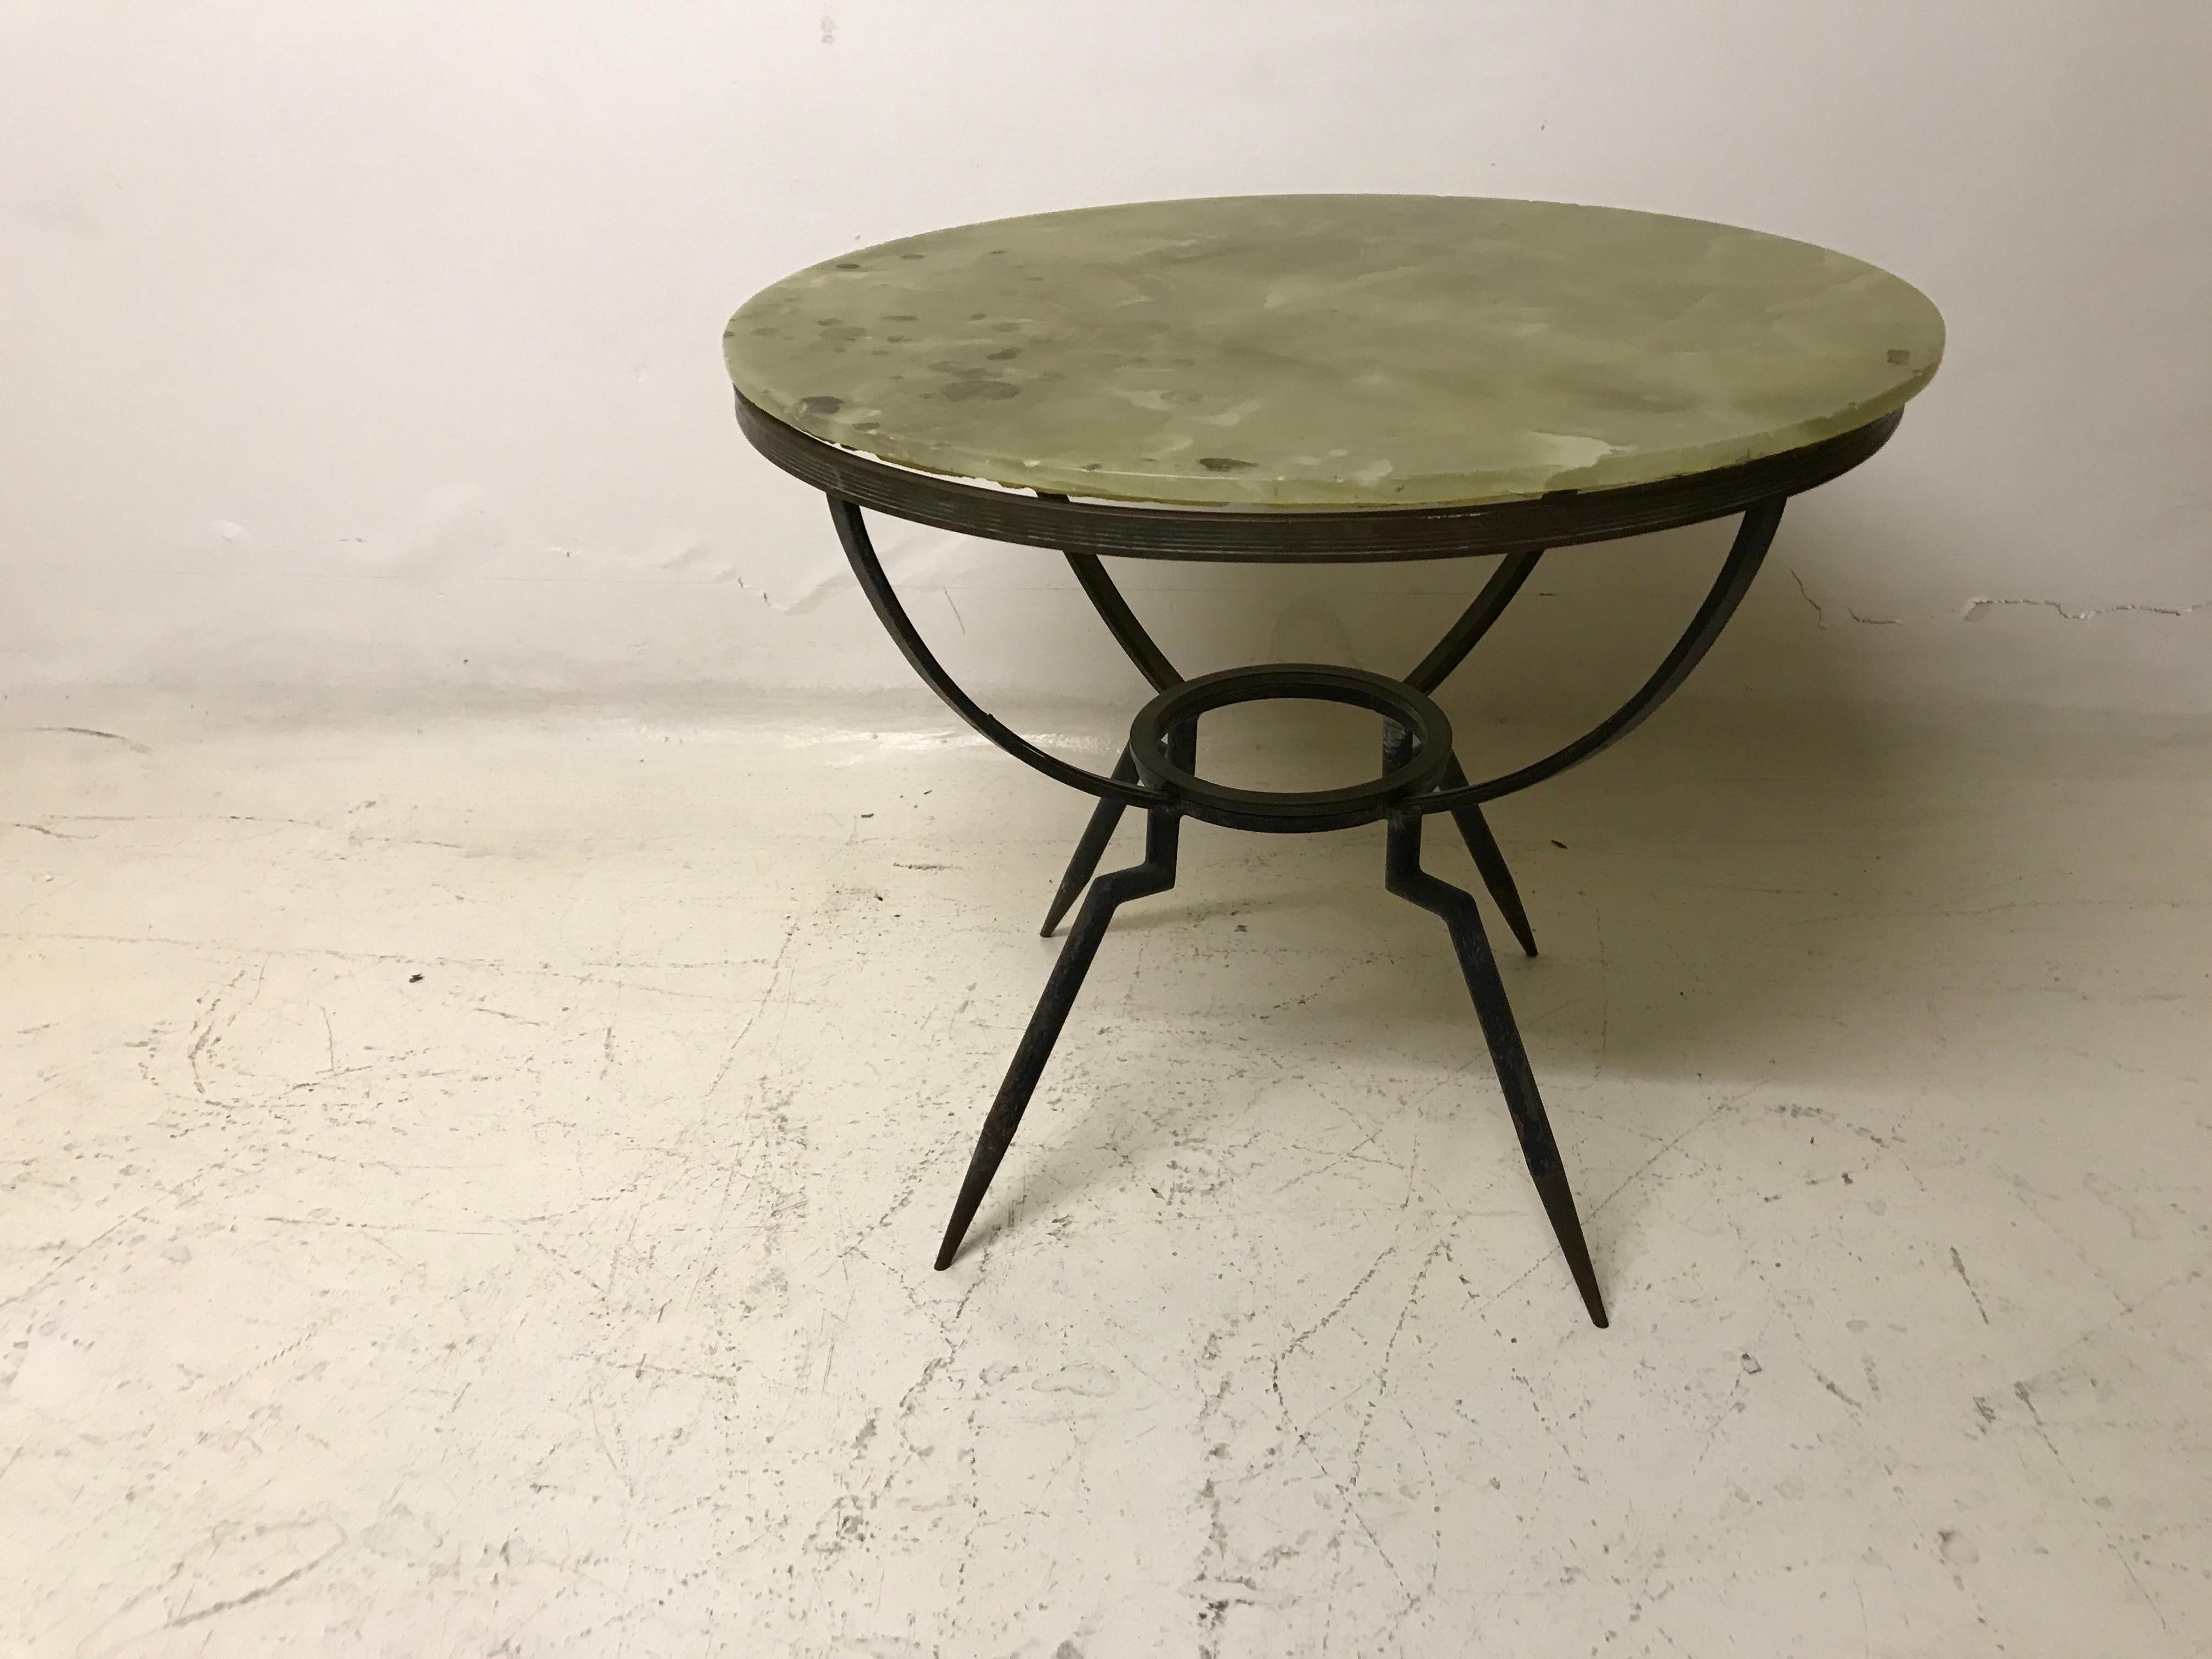 Amaizing Italian table.

Materials: iron and marble
If you want to live in the golden years, this is the coffe table that your project needs.
We have specialized in the sale of Art Deco and Art Nouveau and Vintage styles since 1982. If you have any